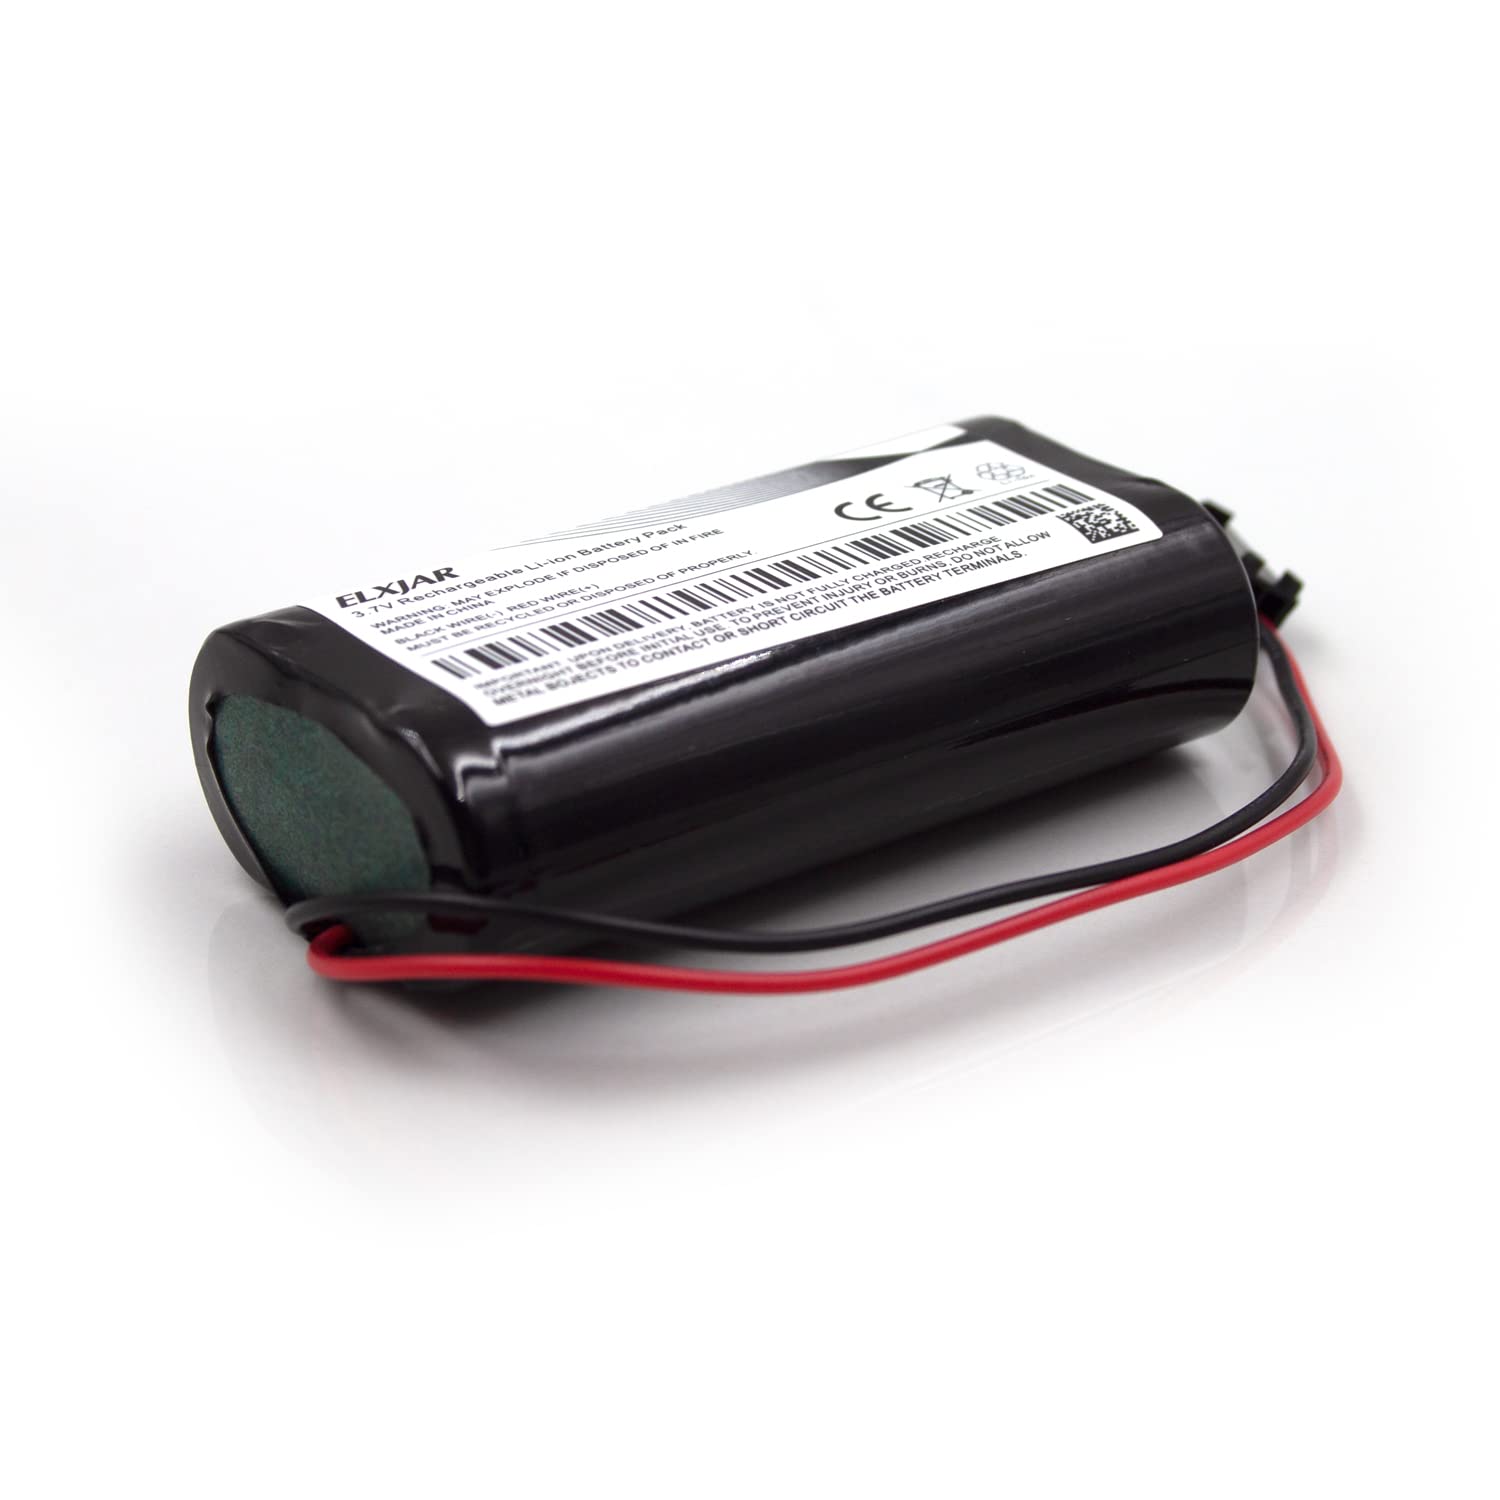 (2-Pack) 3.7V 3600mAh ICR18650 Rechargeable Li-ion Battery Pack with SM-2P Connector